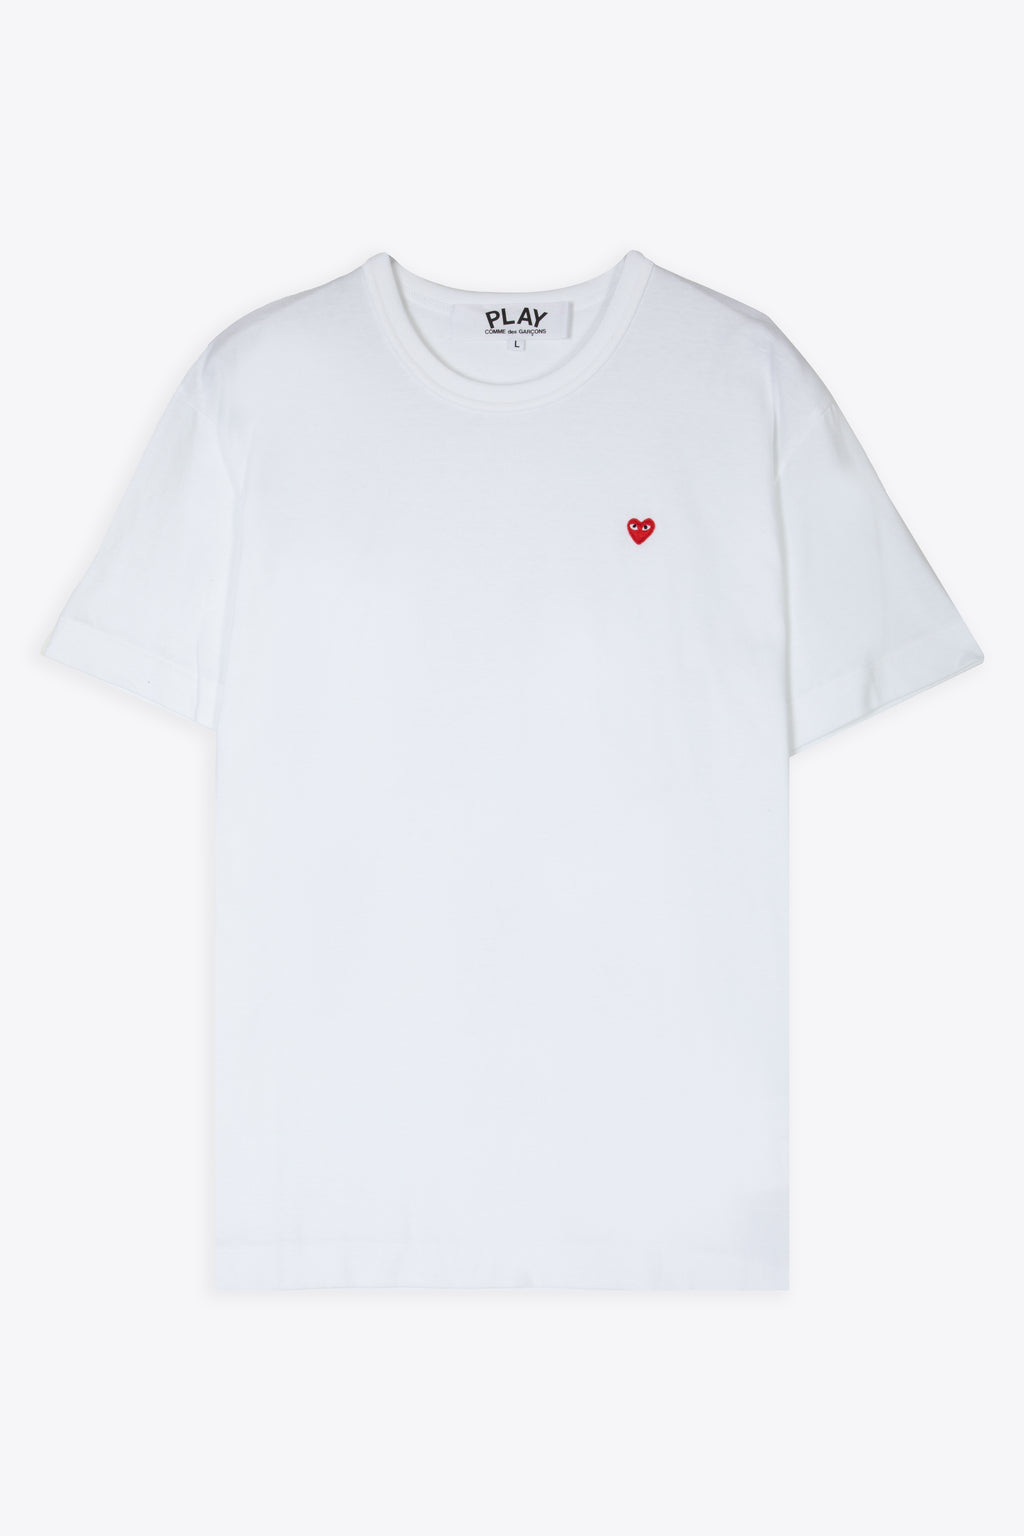 alt-image__White-cotton-t-shirt-with-small-heart-patch